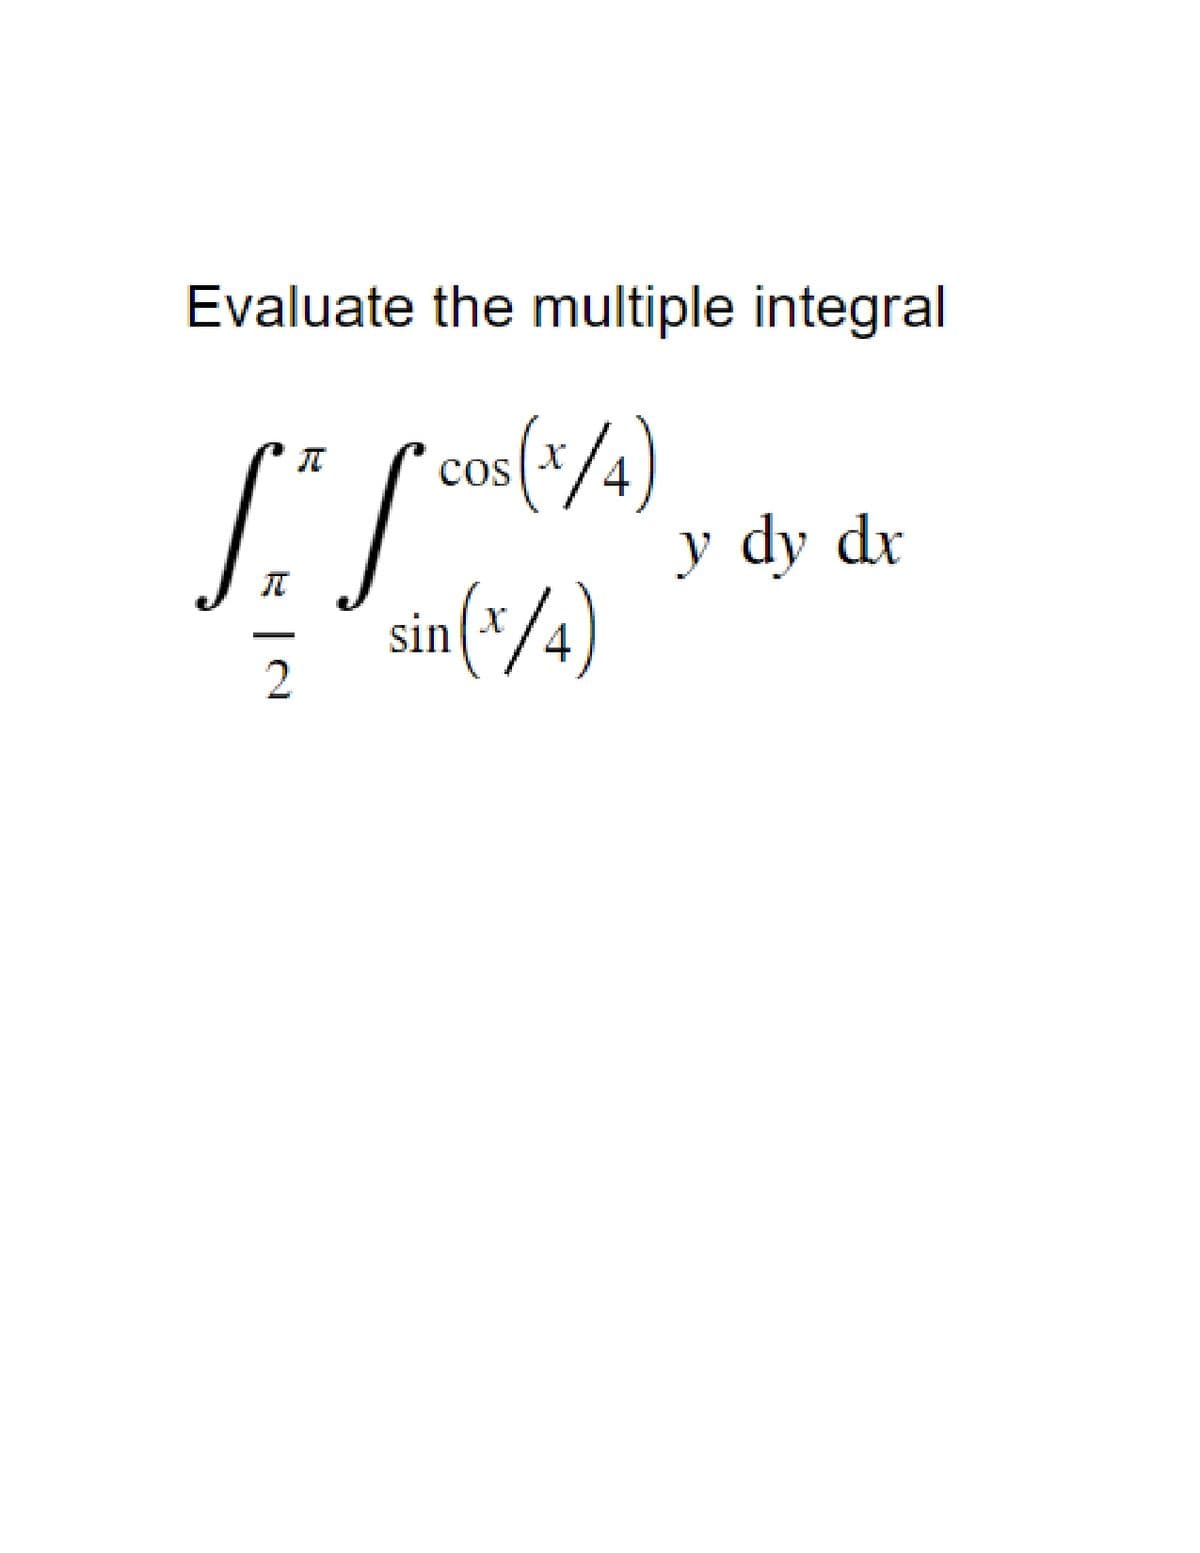 Evaluate the multiple integral
cos(x/4)
COS
SS
2
sin(x/4)
y dy dx